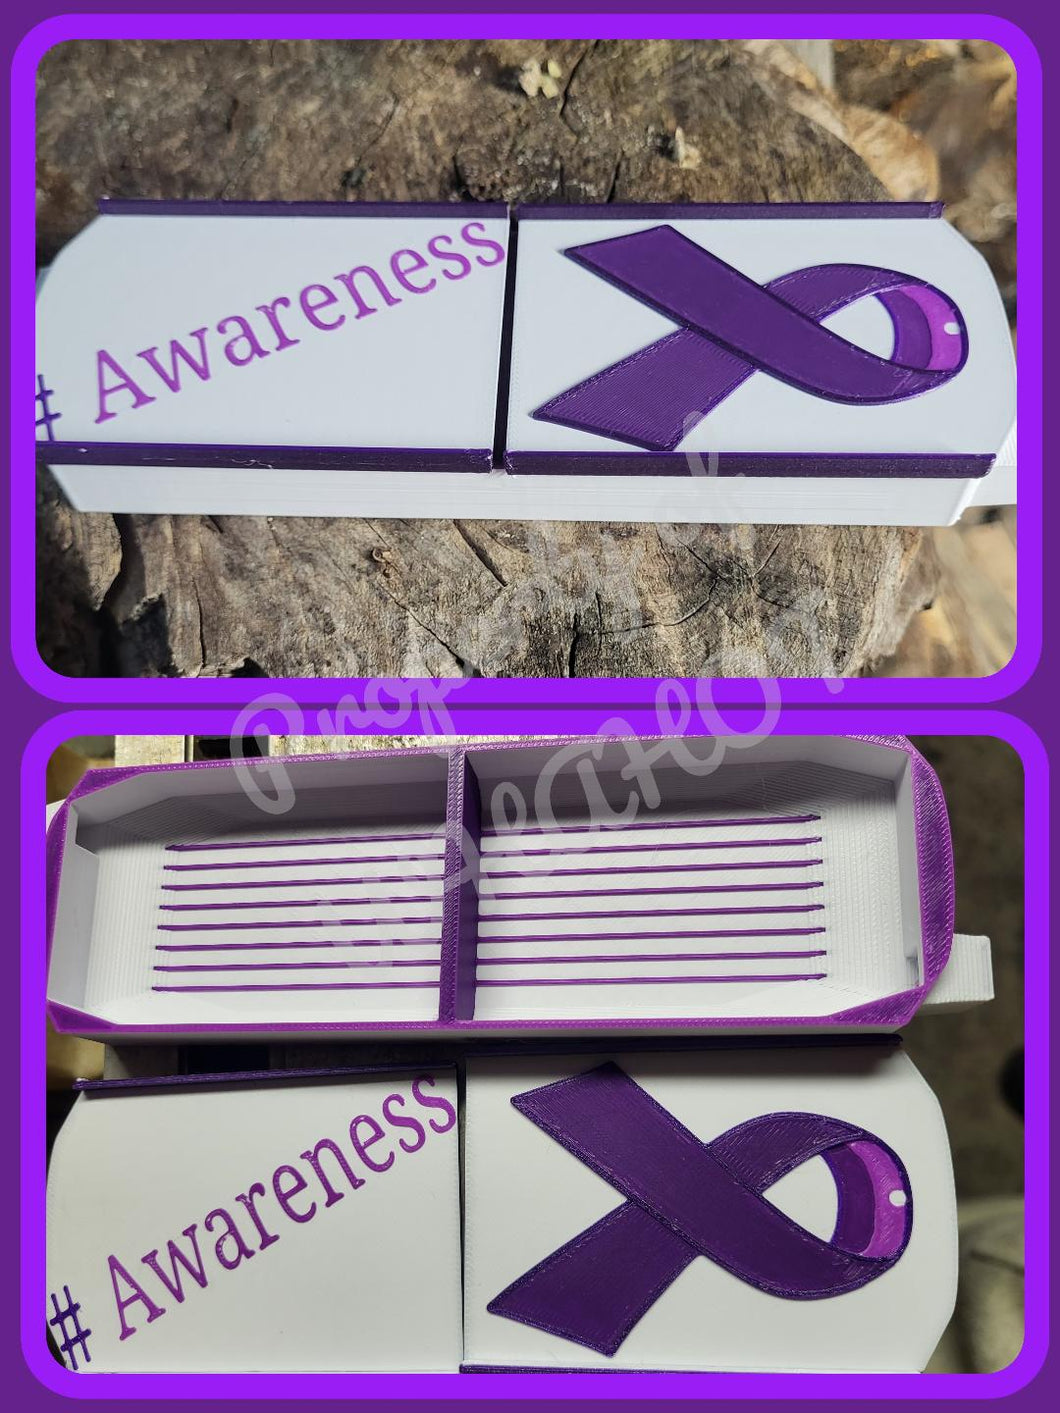 #Awareness divided tray for domestic violence - Retired